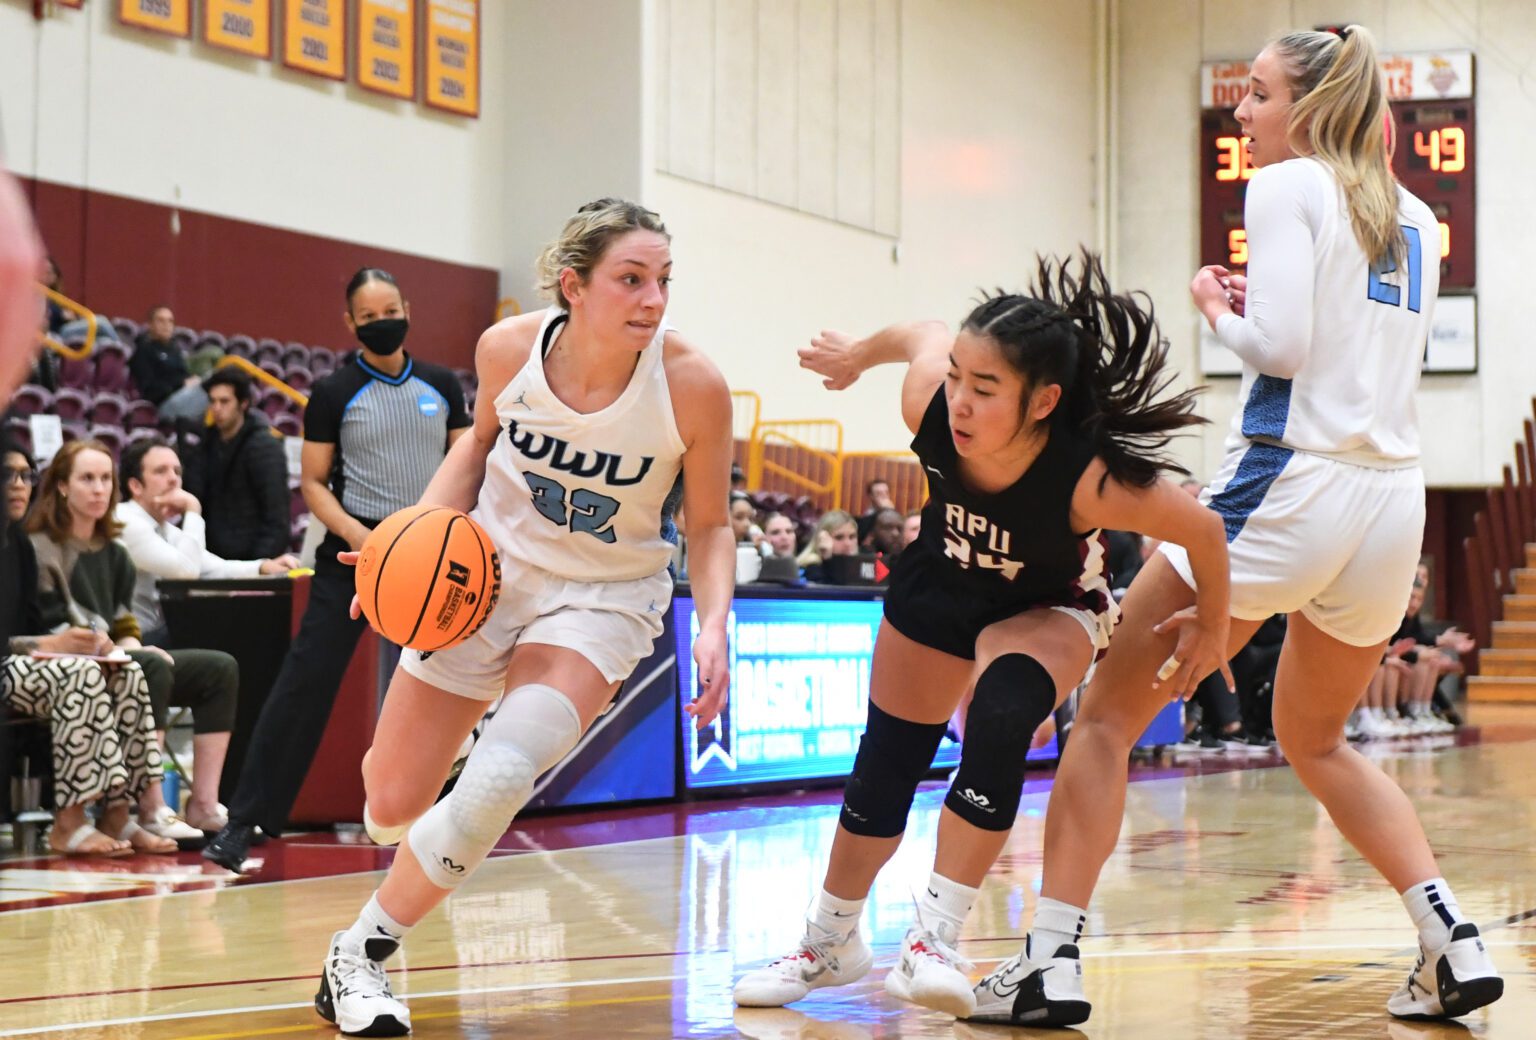 Western senior Mollie Olson drives against an Azusa Pacific defender March 10 during the Vikings' season-ending 71-53 loss in the NCAA Divison II West Regional Tournament in Carson